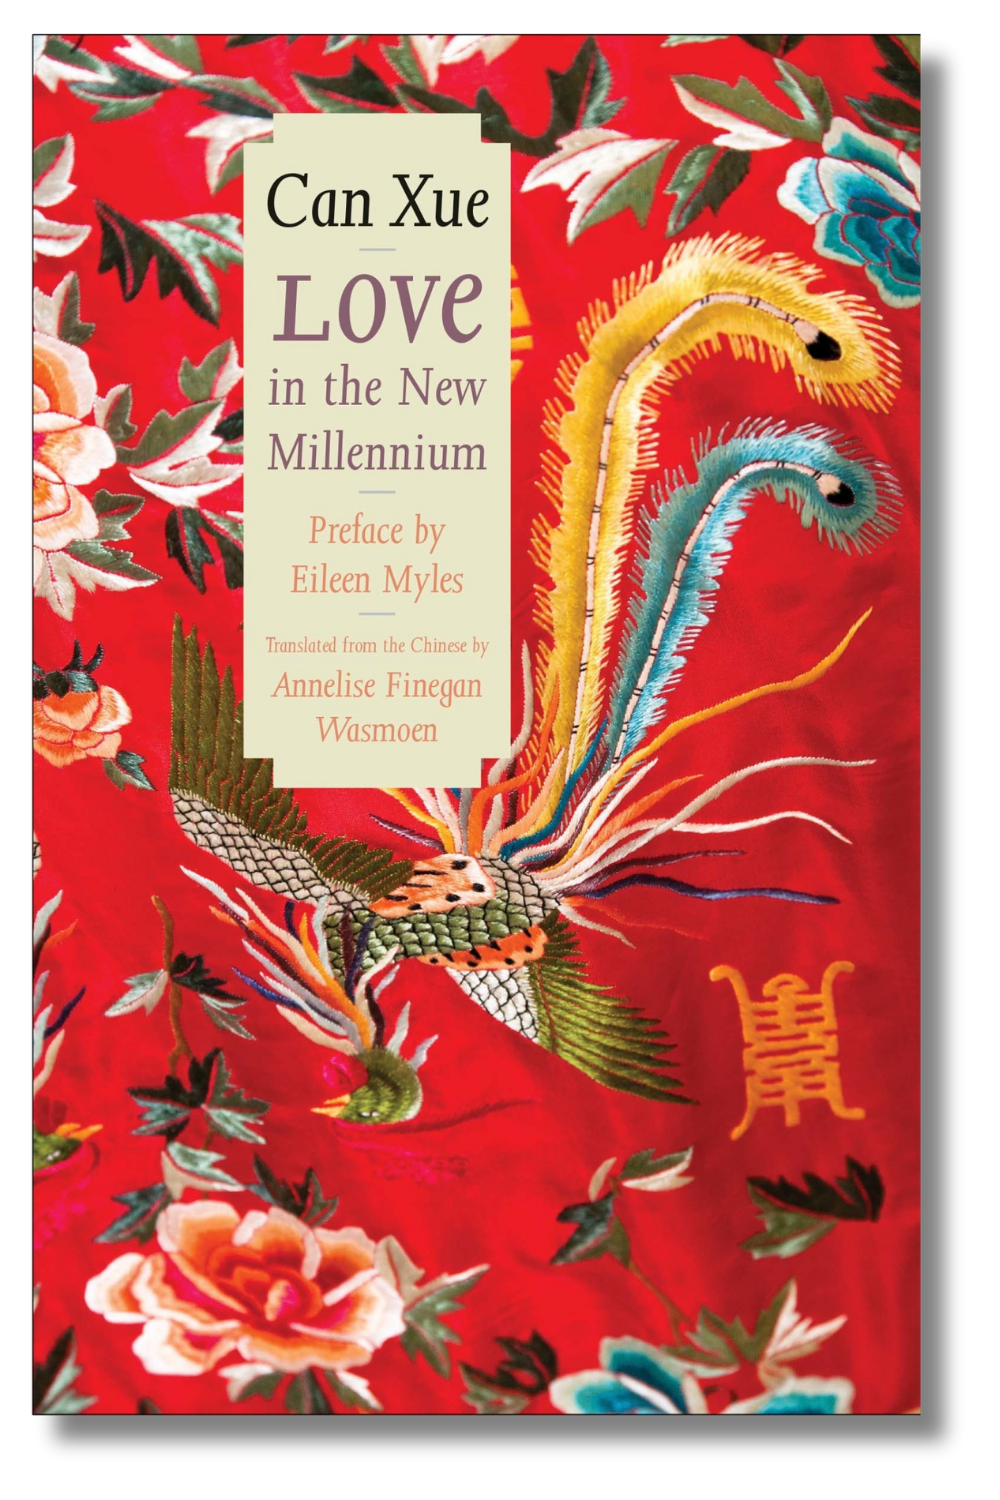 The cover of "Love in the New Millennium" by Can Xue, tr. by Annelise Finnegan Wasmoen